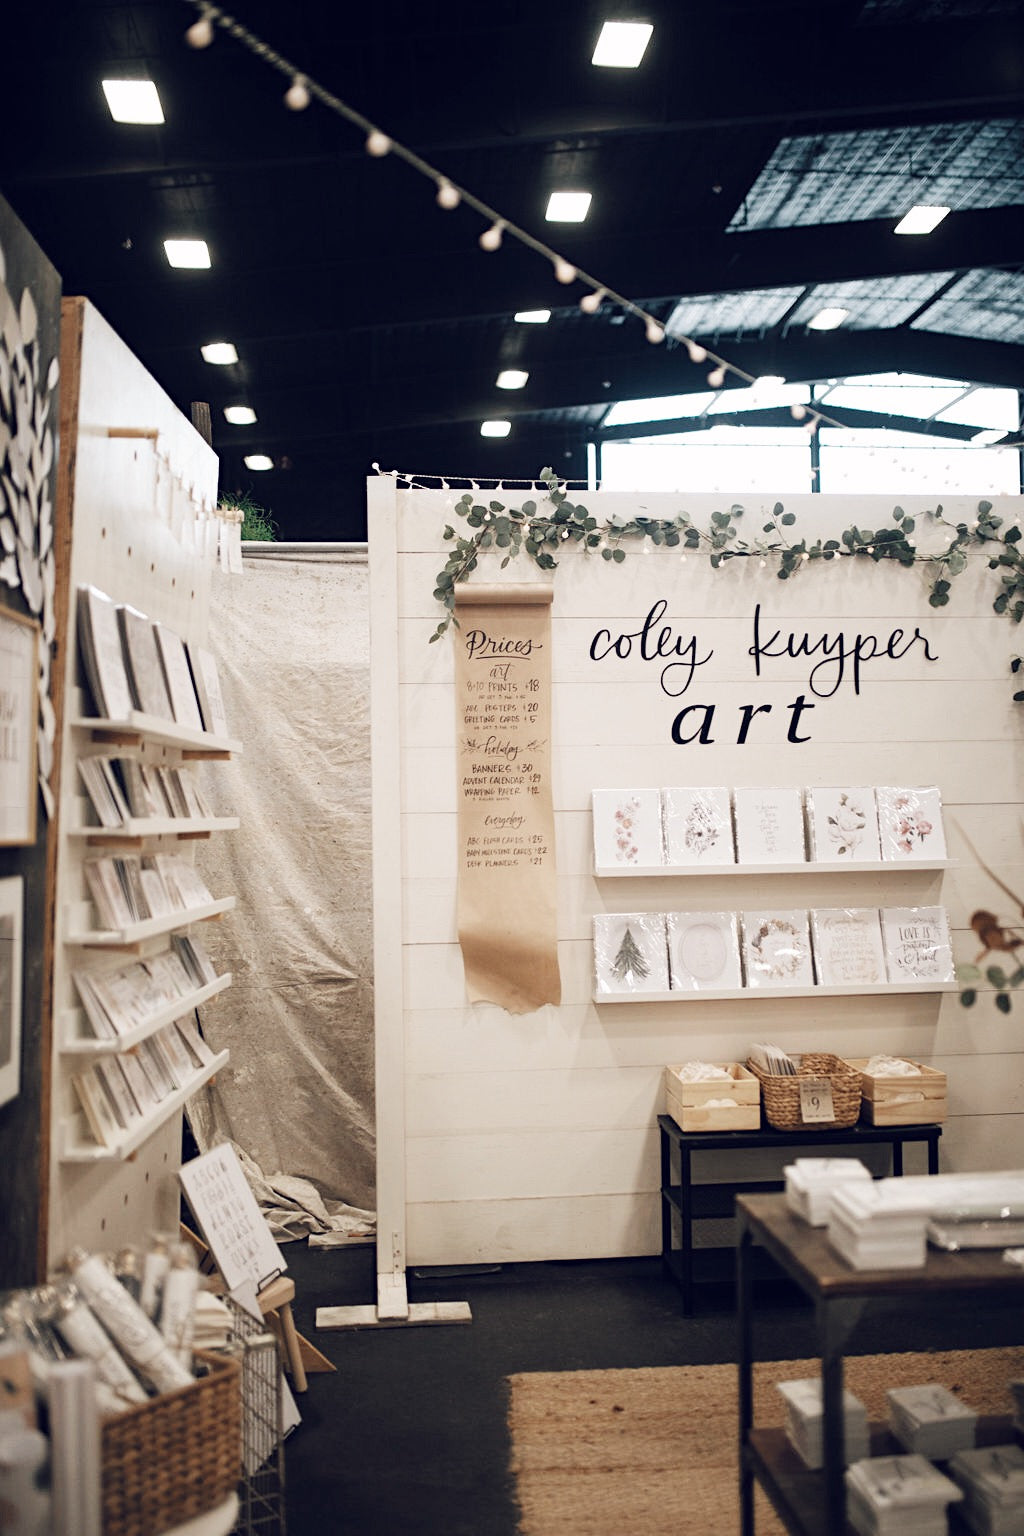 coley kuyper art booth at junk in the trunk vintage market